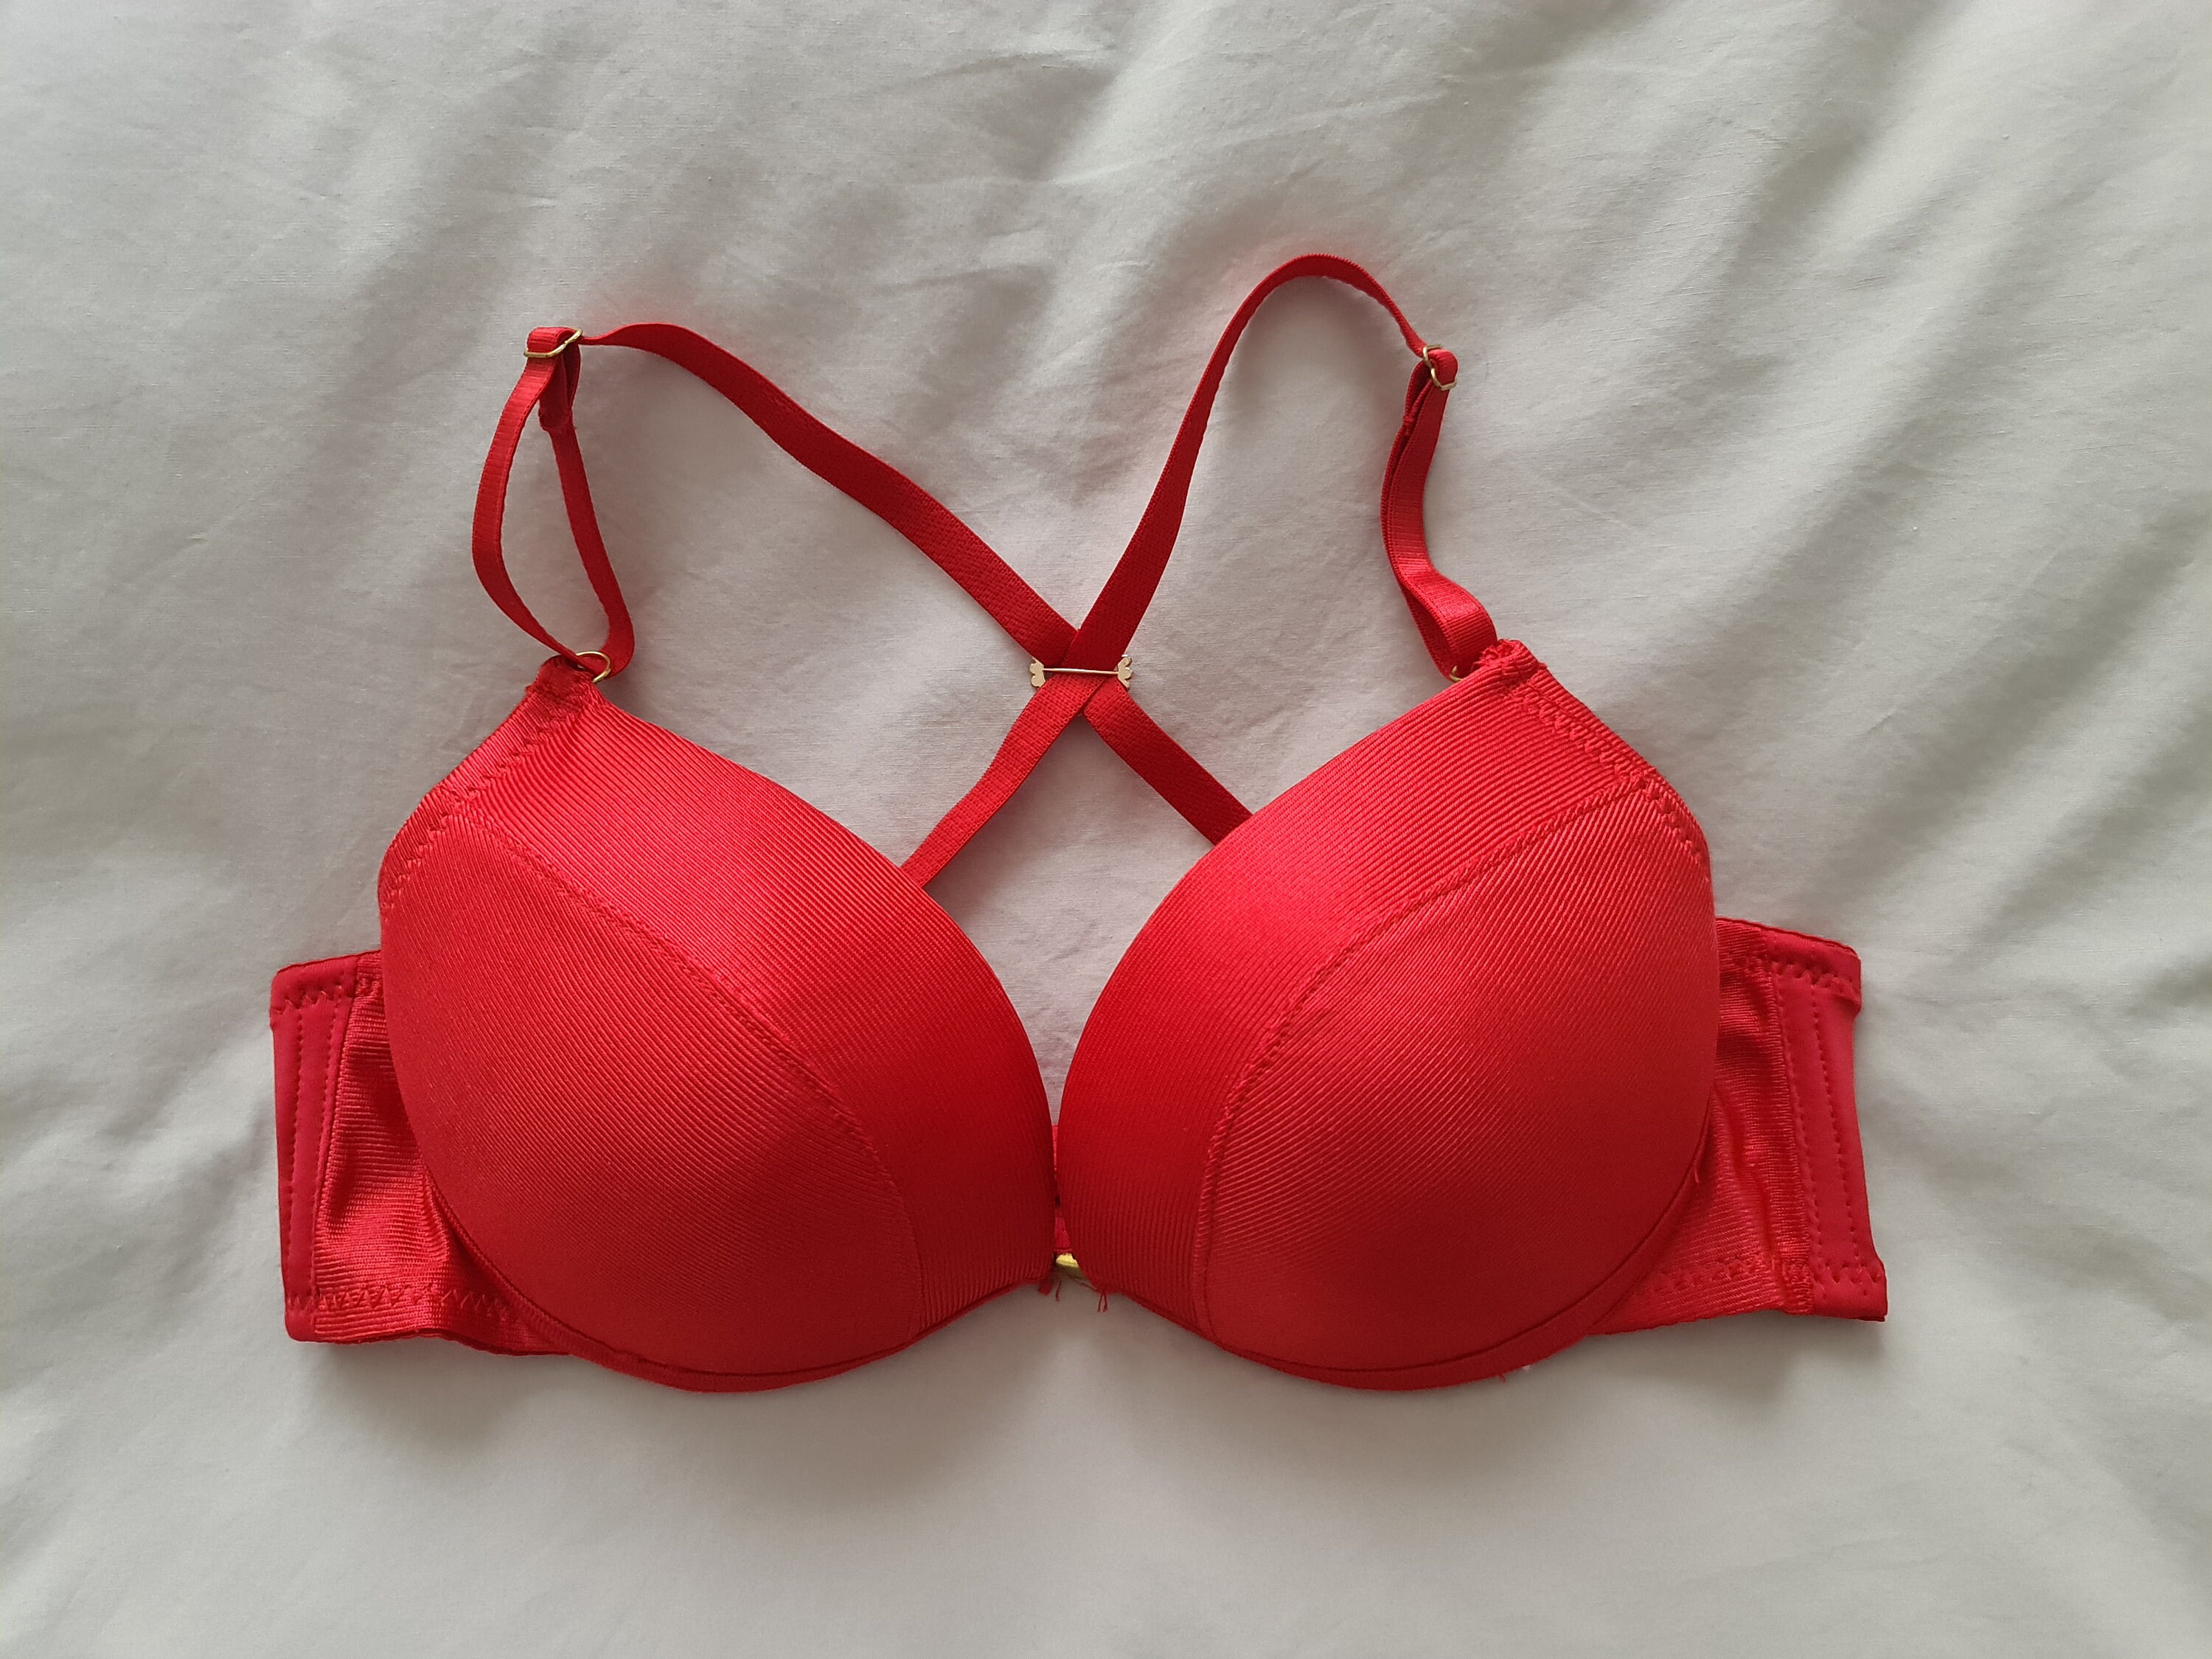 Vintage New Old Stock Bra from Japan size 12D Aus & 34D UK/US, Japan F75 -   Portugal